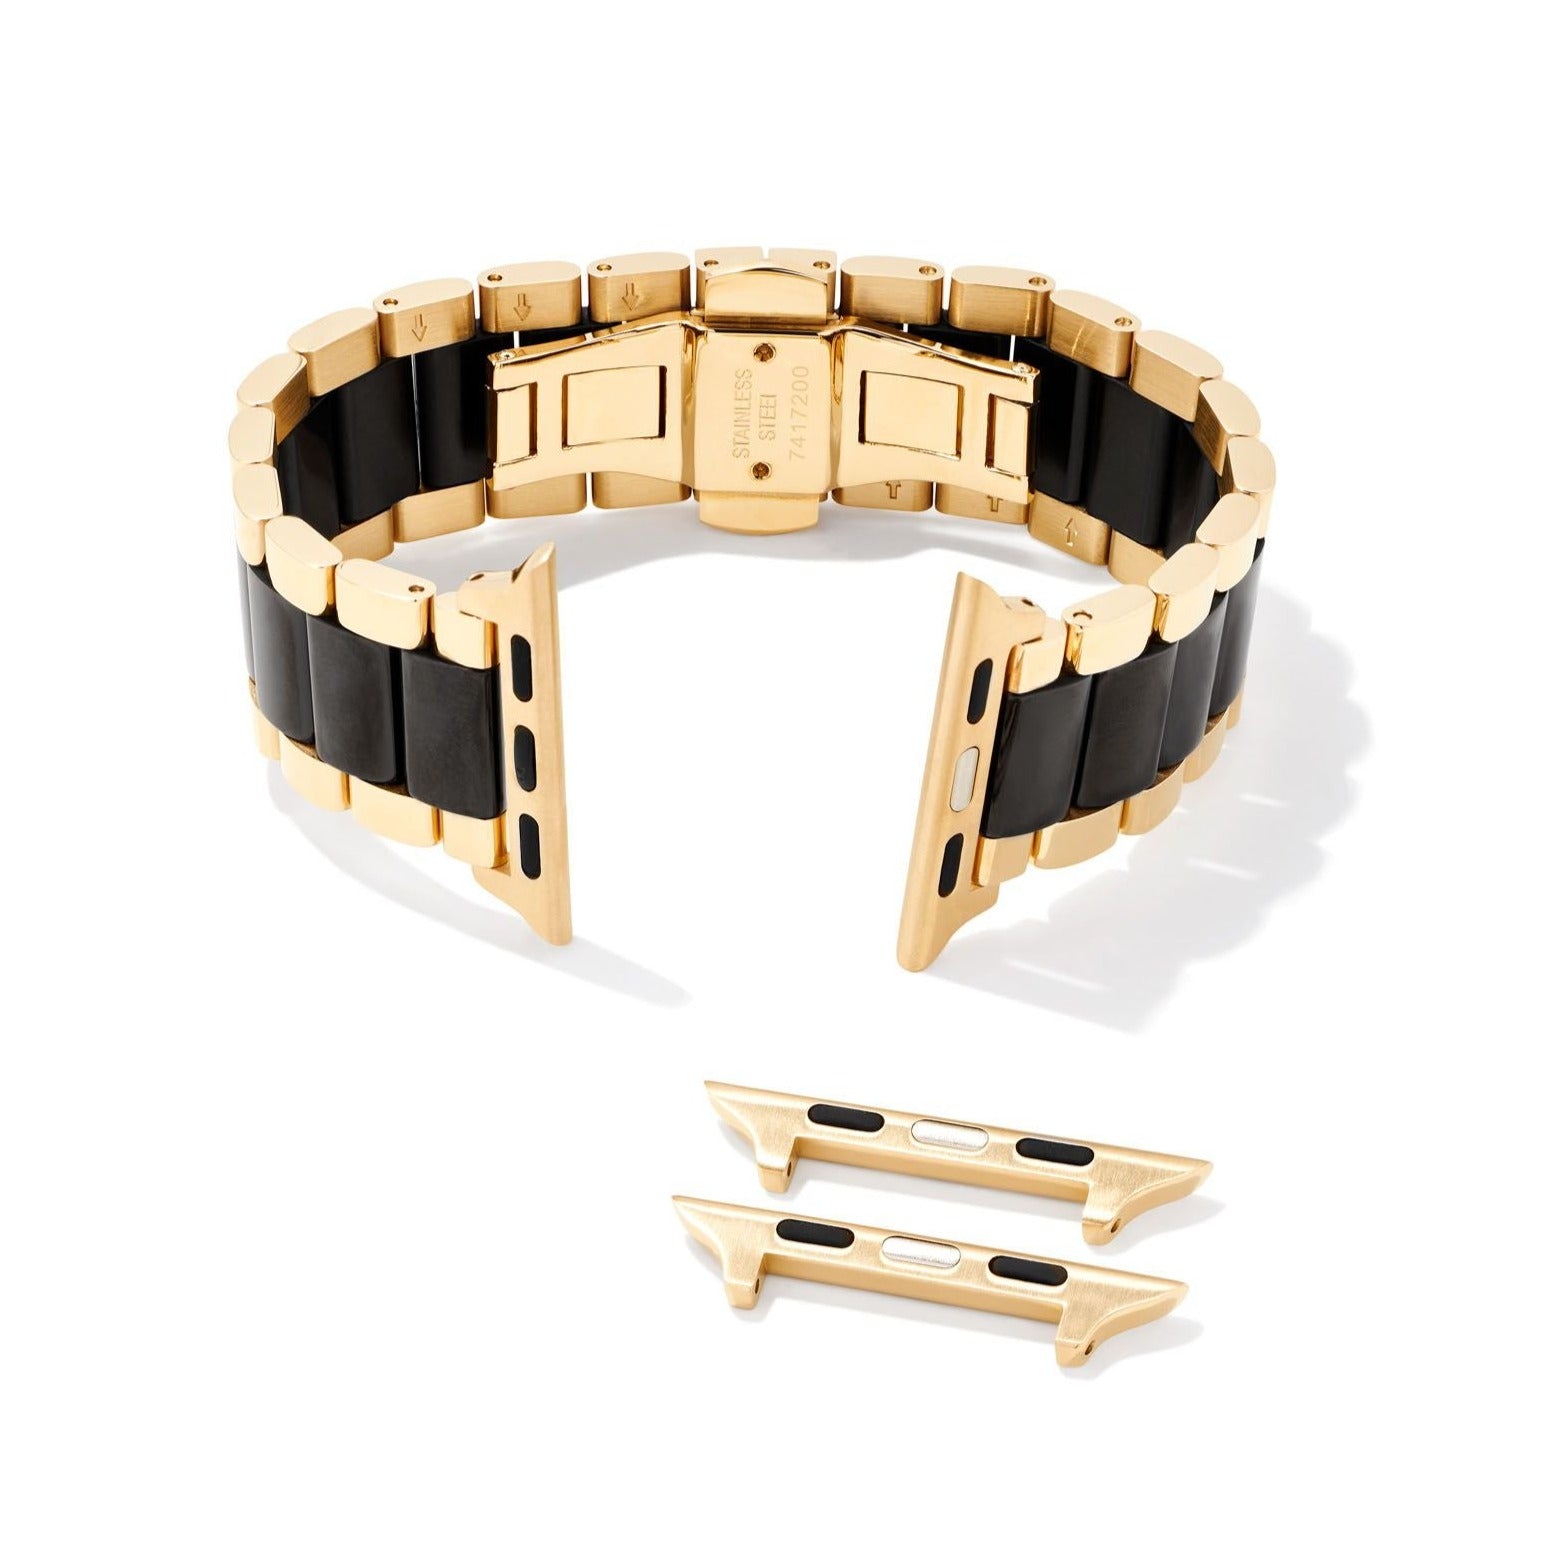 Kendra Scott | Dira 3 Link Watch Band in Gold Tone & Black Stainless Steel